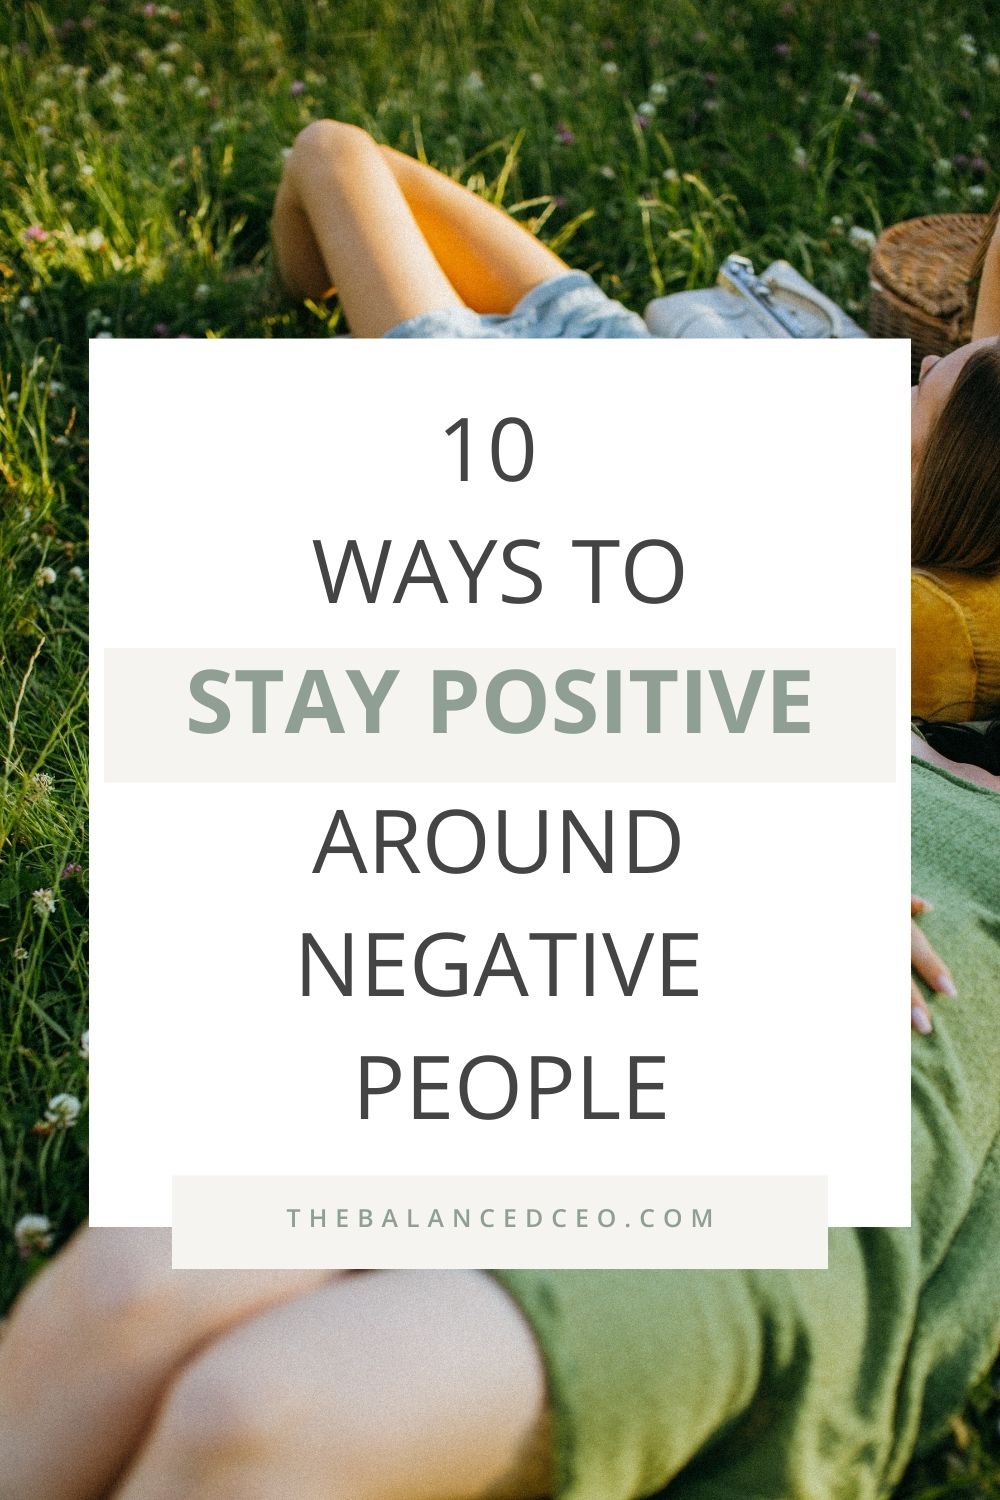 10 Ways to Stay Positive Around Negative People